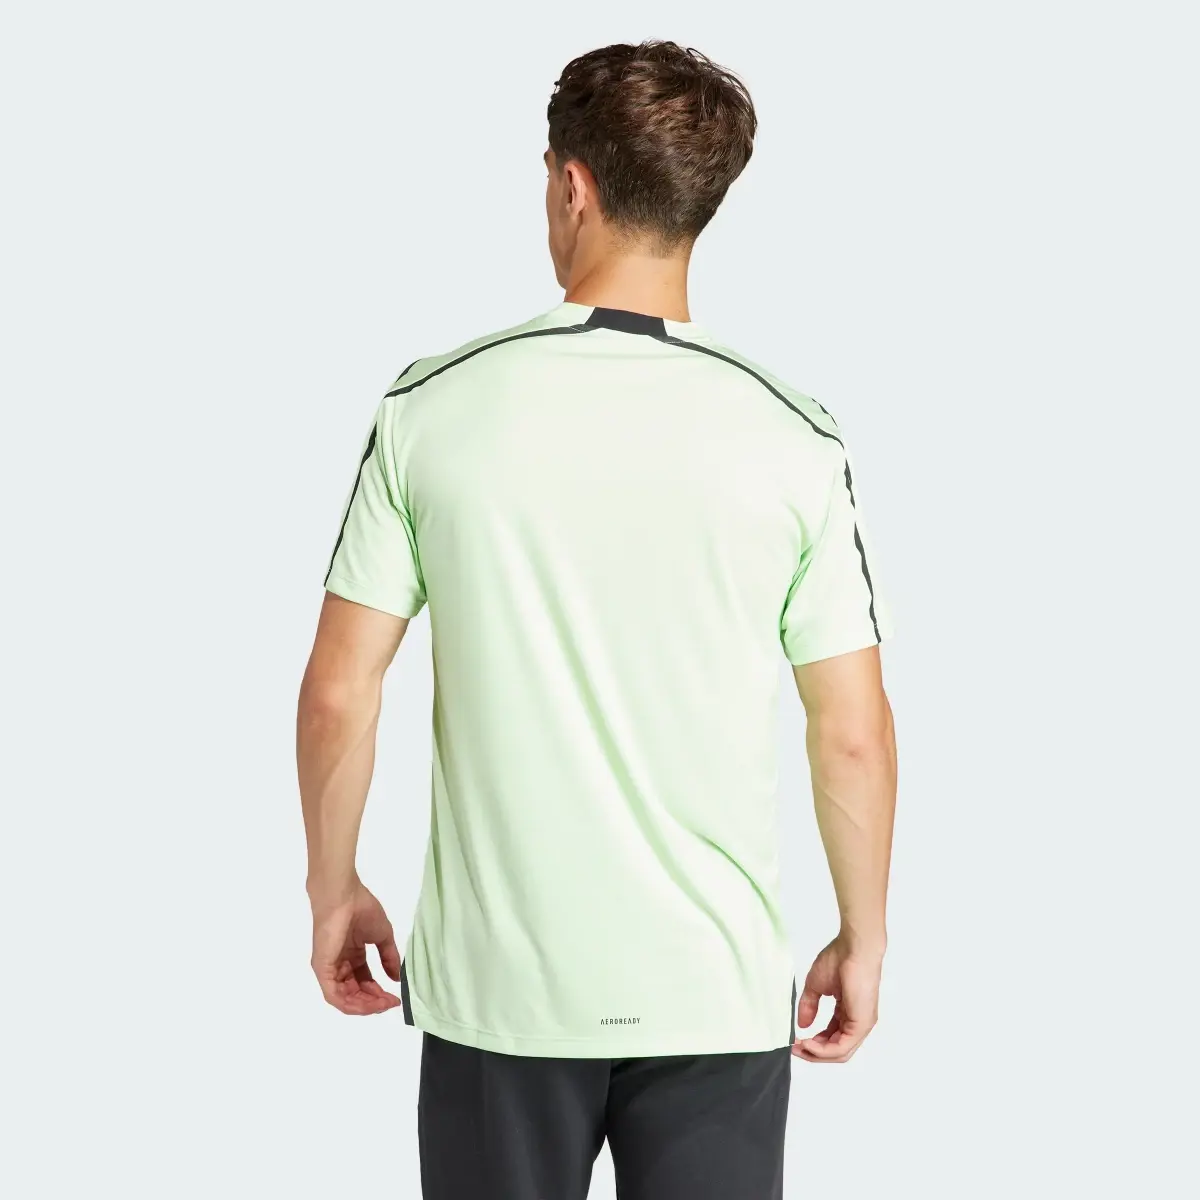 Adidas T-shirt Designed for Training adistrong Workout. 3